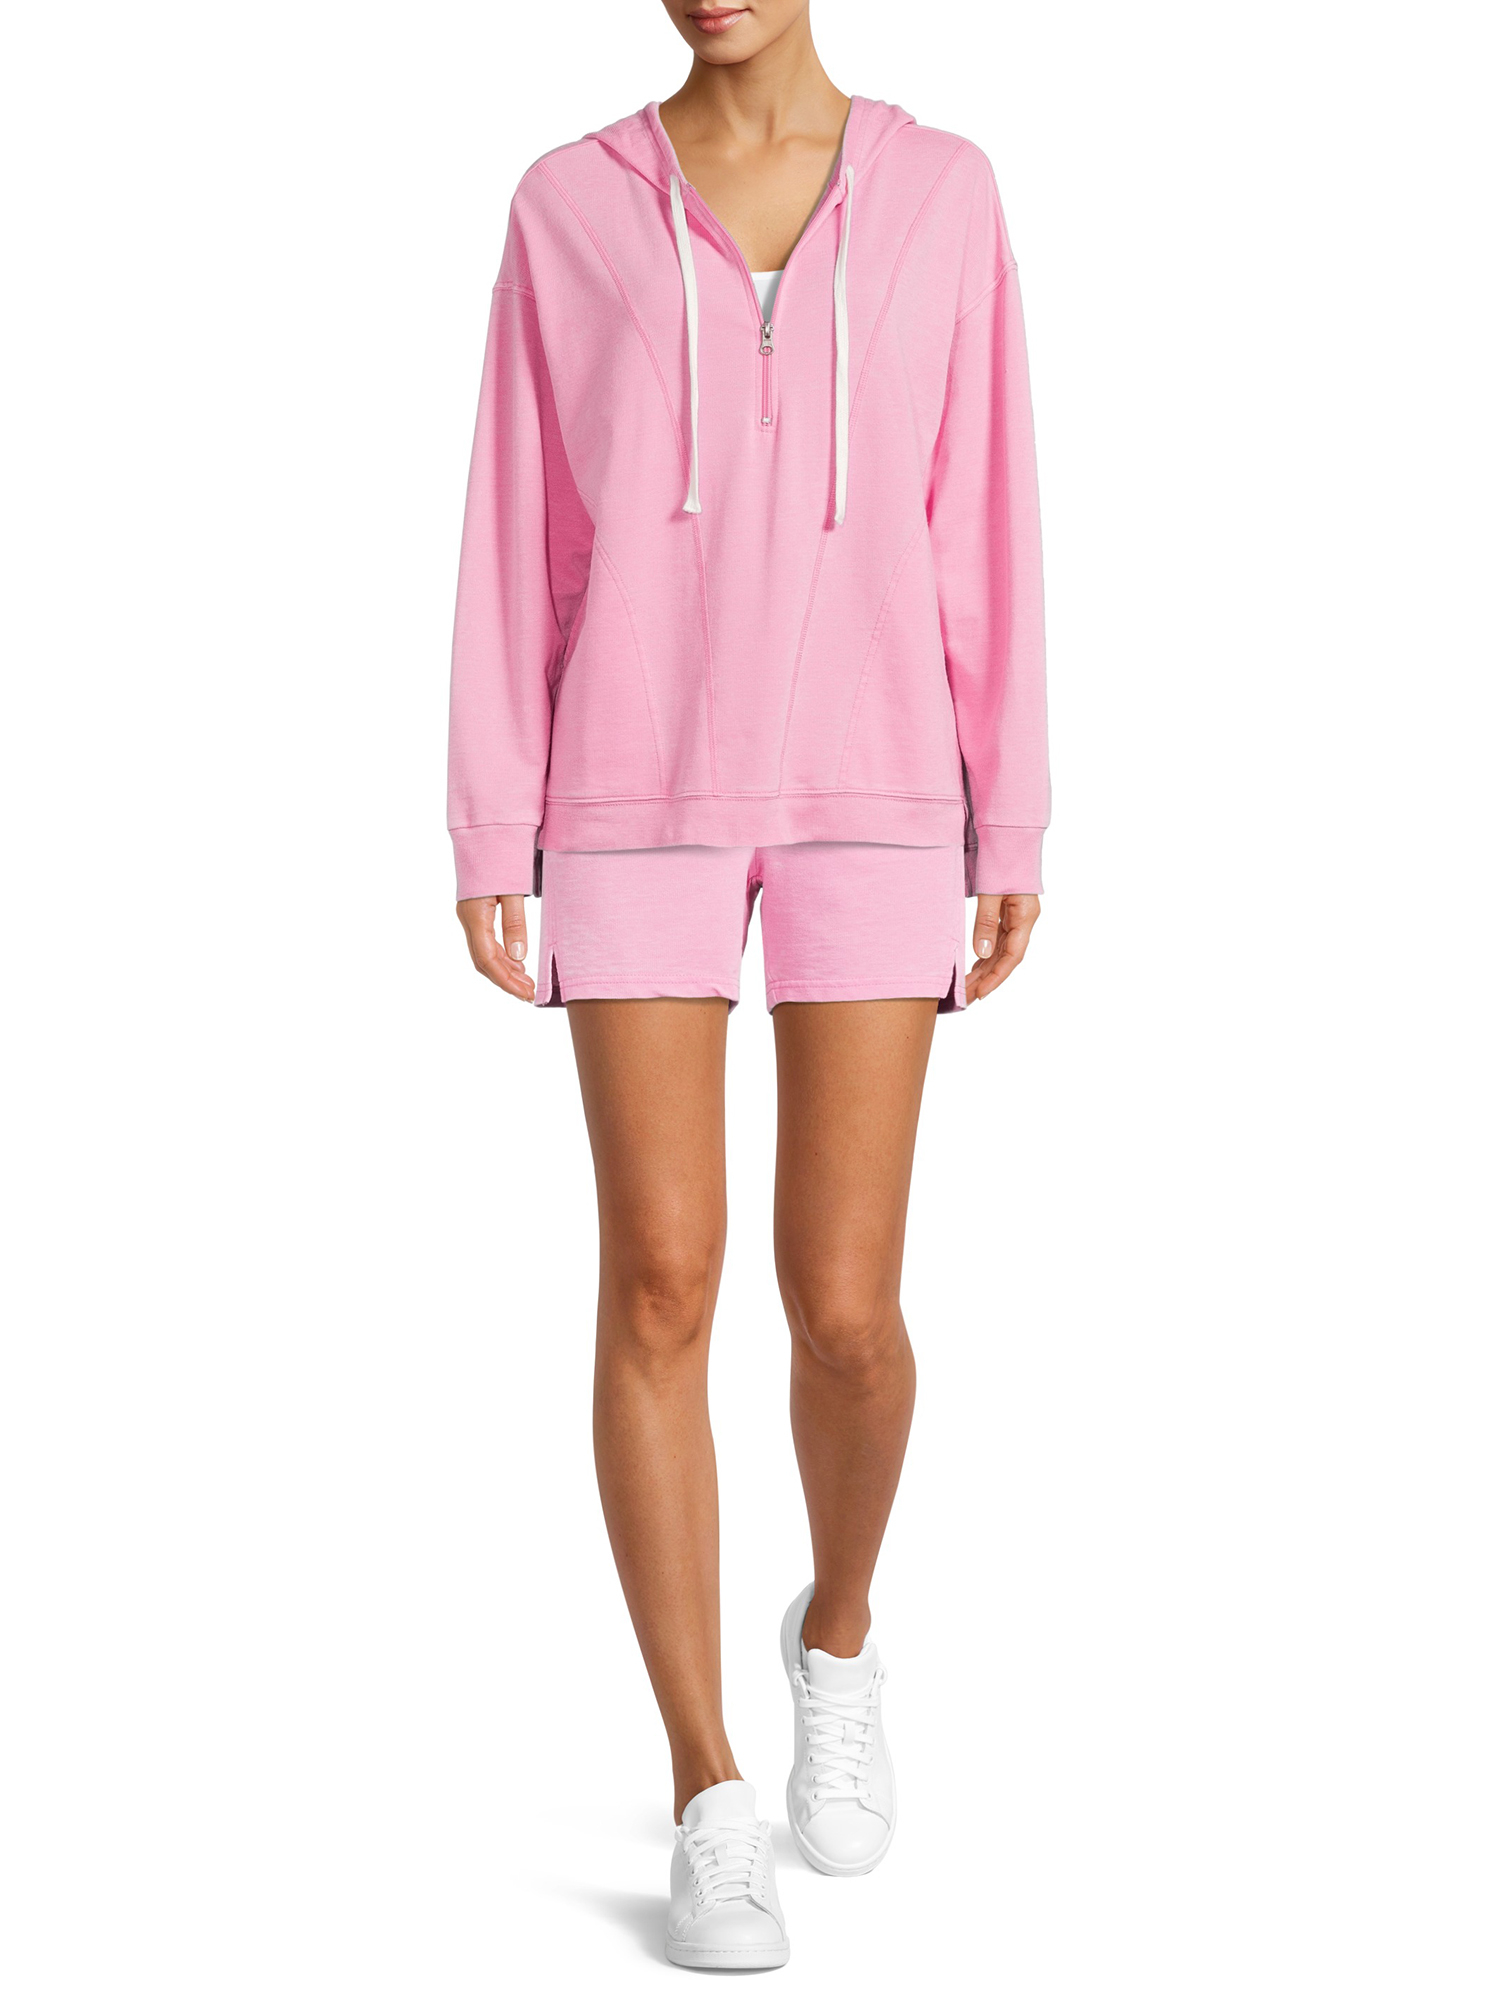 Womens French Terry Hoodie $7.